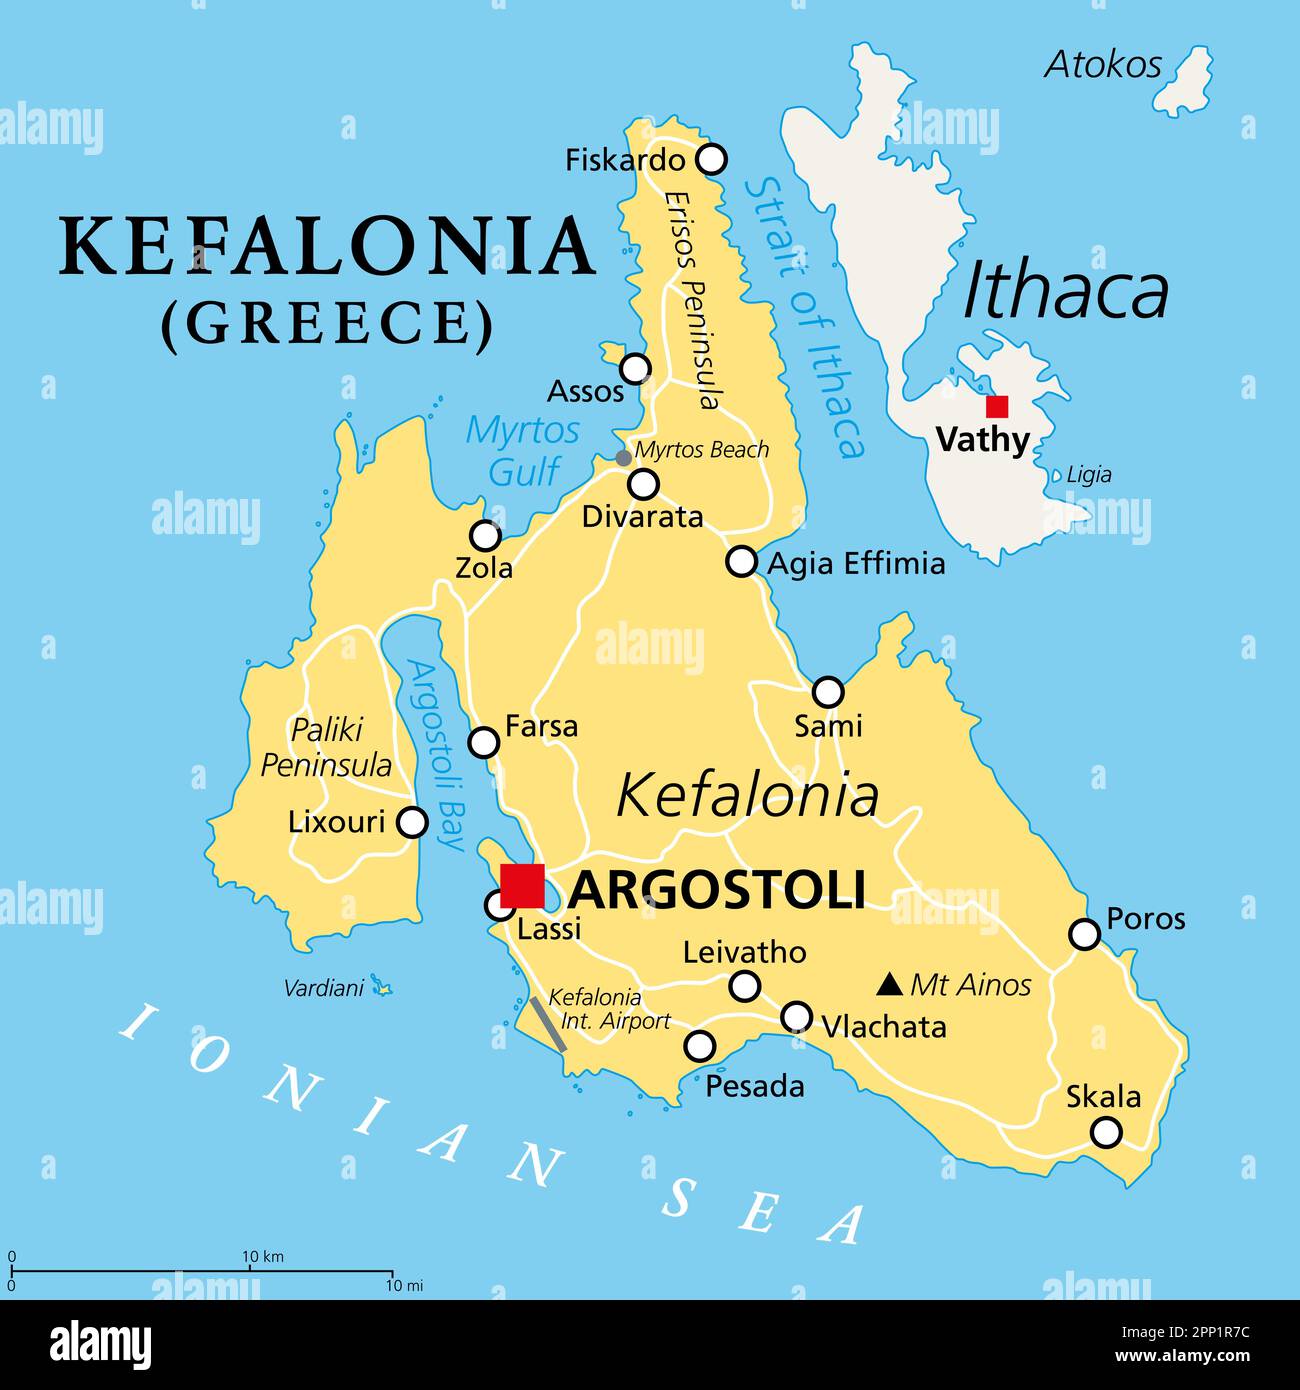 Kefalonia, Greek island, political map. Also known as Cephalonia, Kefallinia or Kephallenia, the largest Ionian Island, located in western Greece. Stock Photo